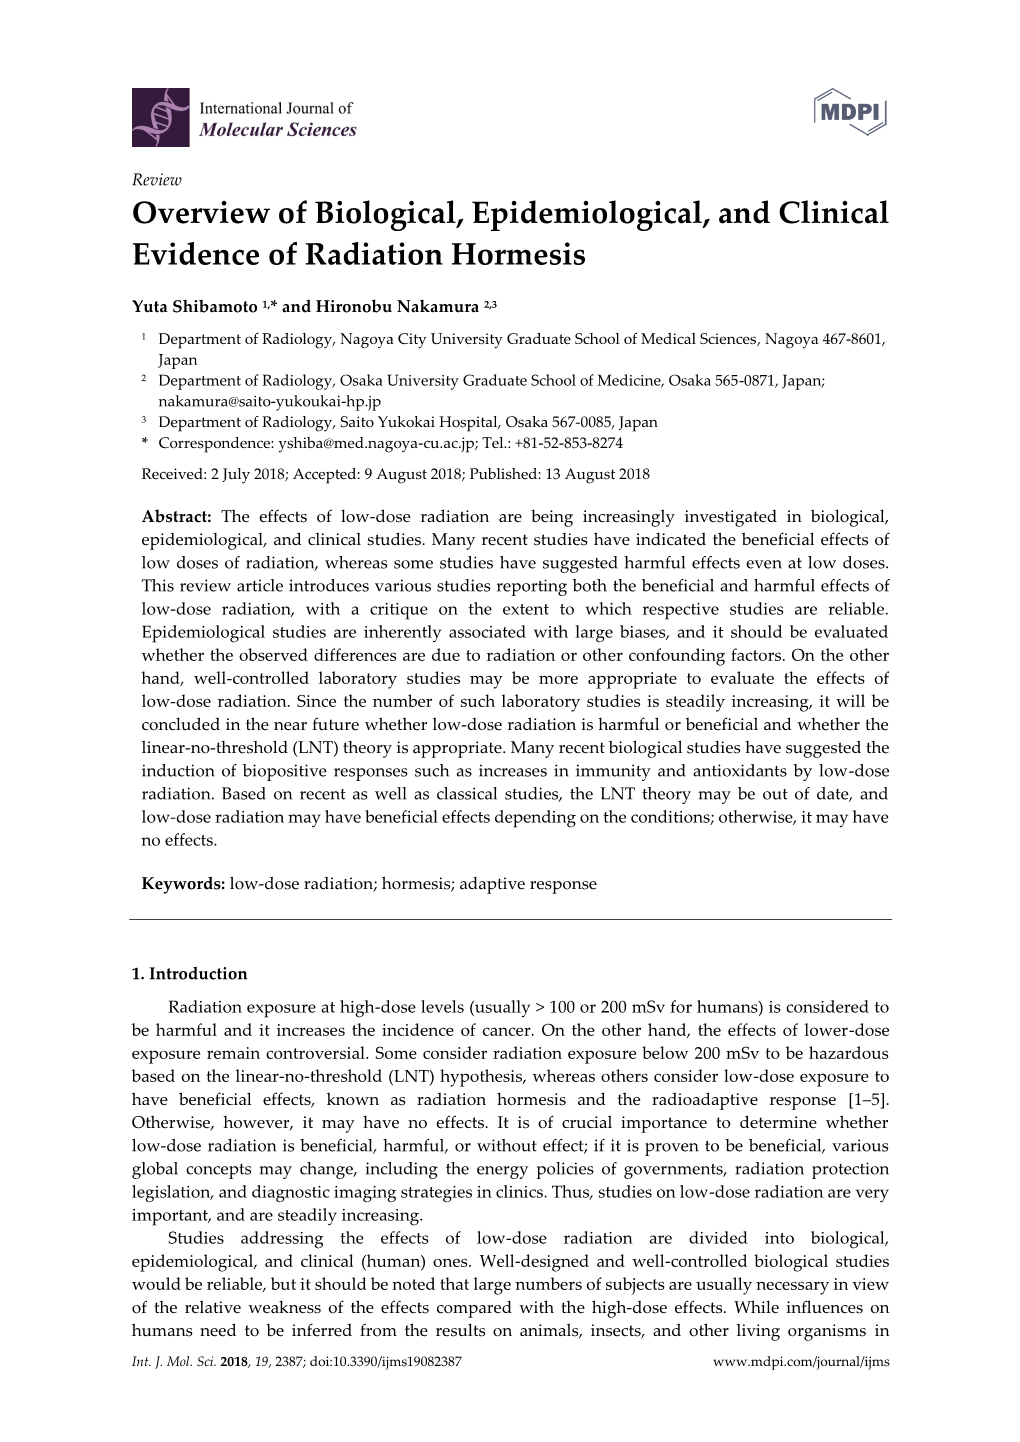 Overview of Biological, Epidemiological, and Clinical Evidence of Radiation Hormesis